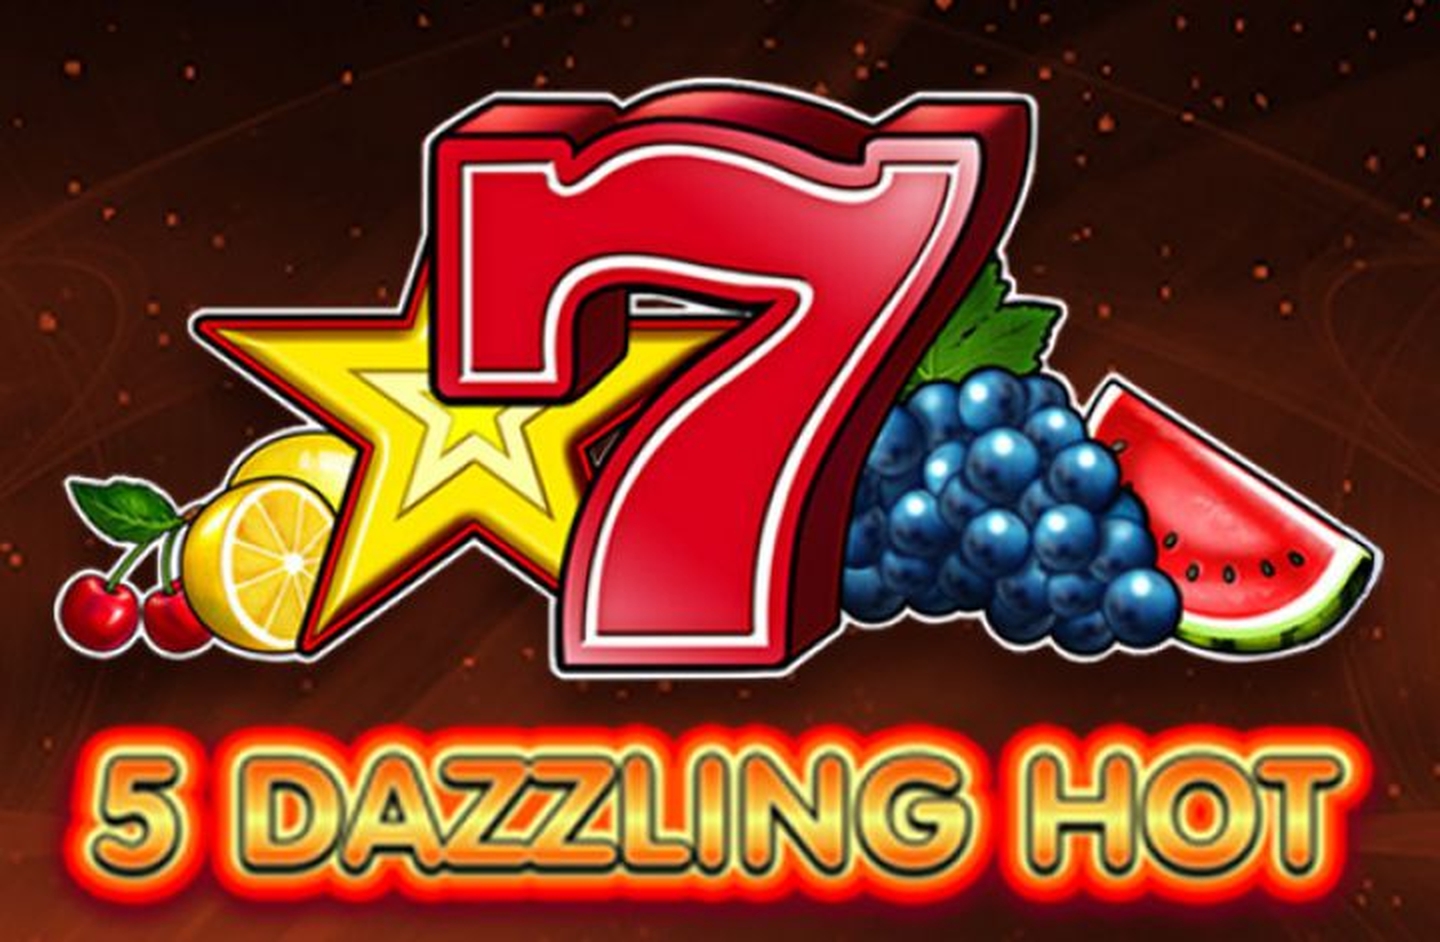 The 5 Dazzling Hot Online Slot Demo Game by EGT